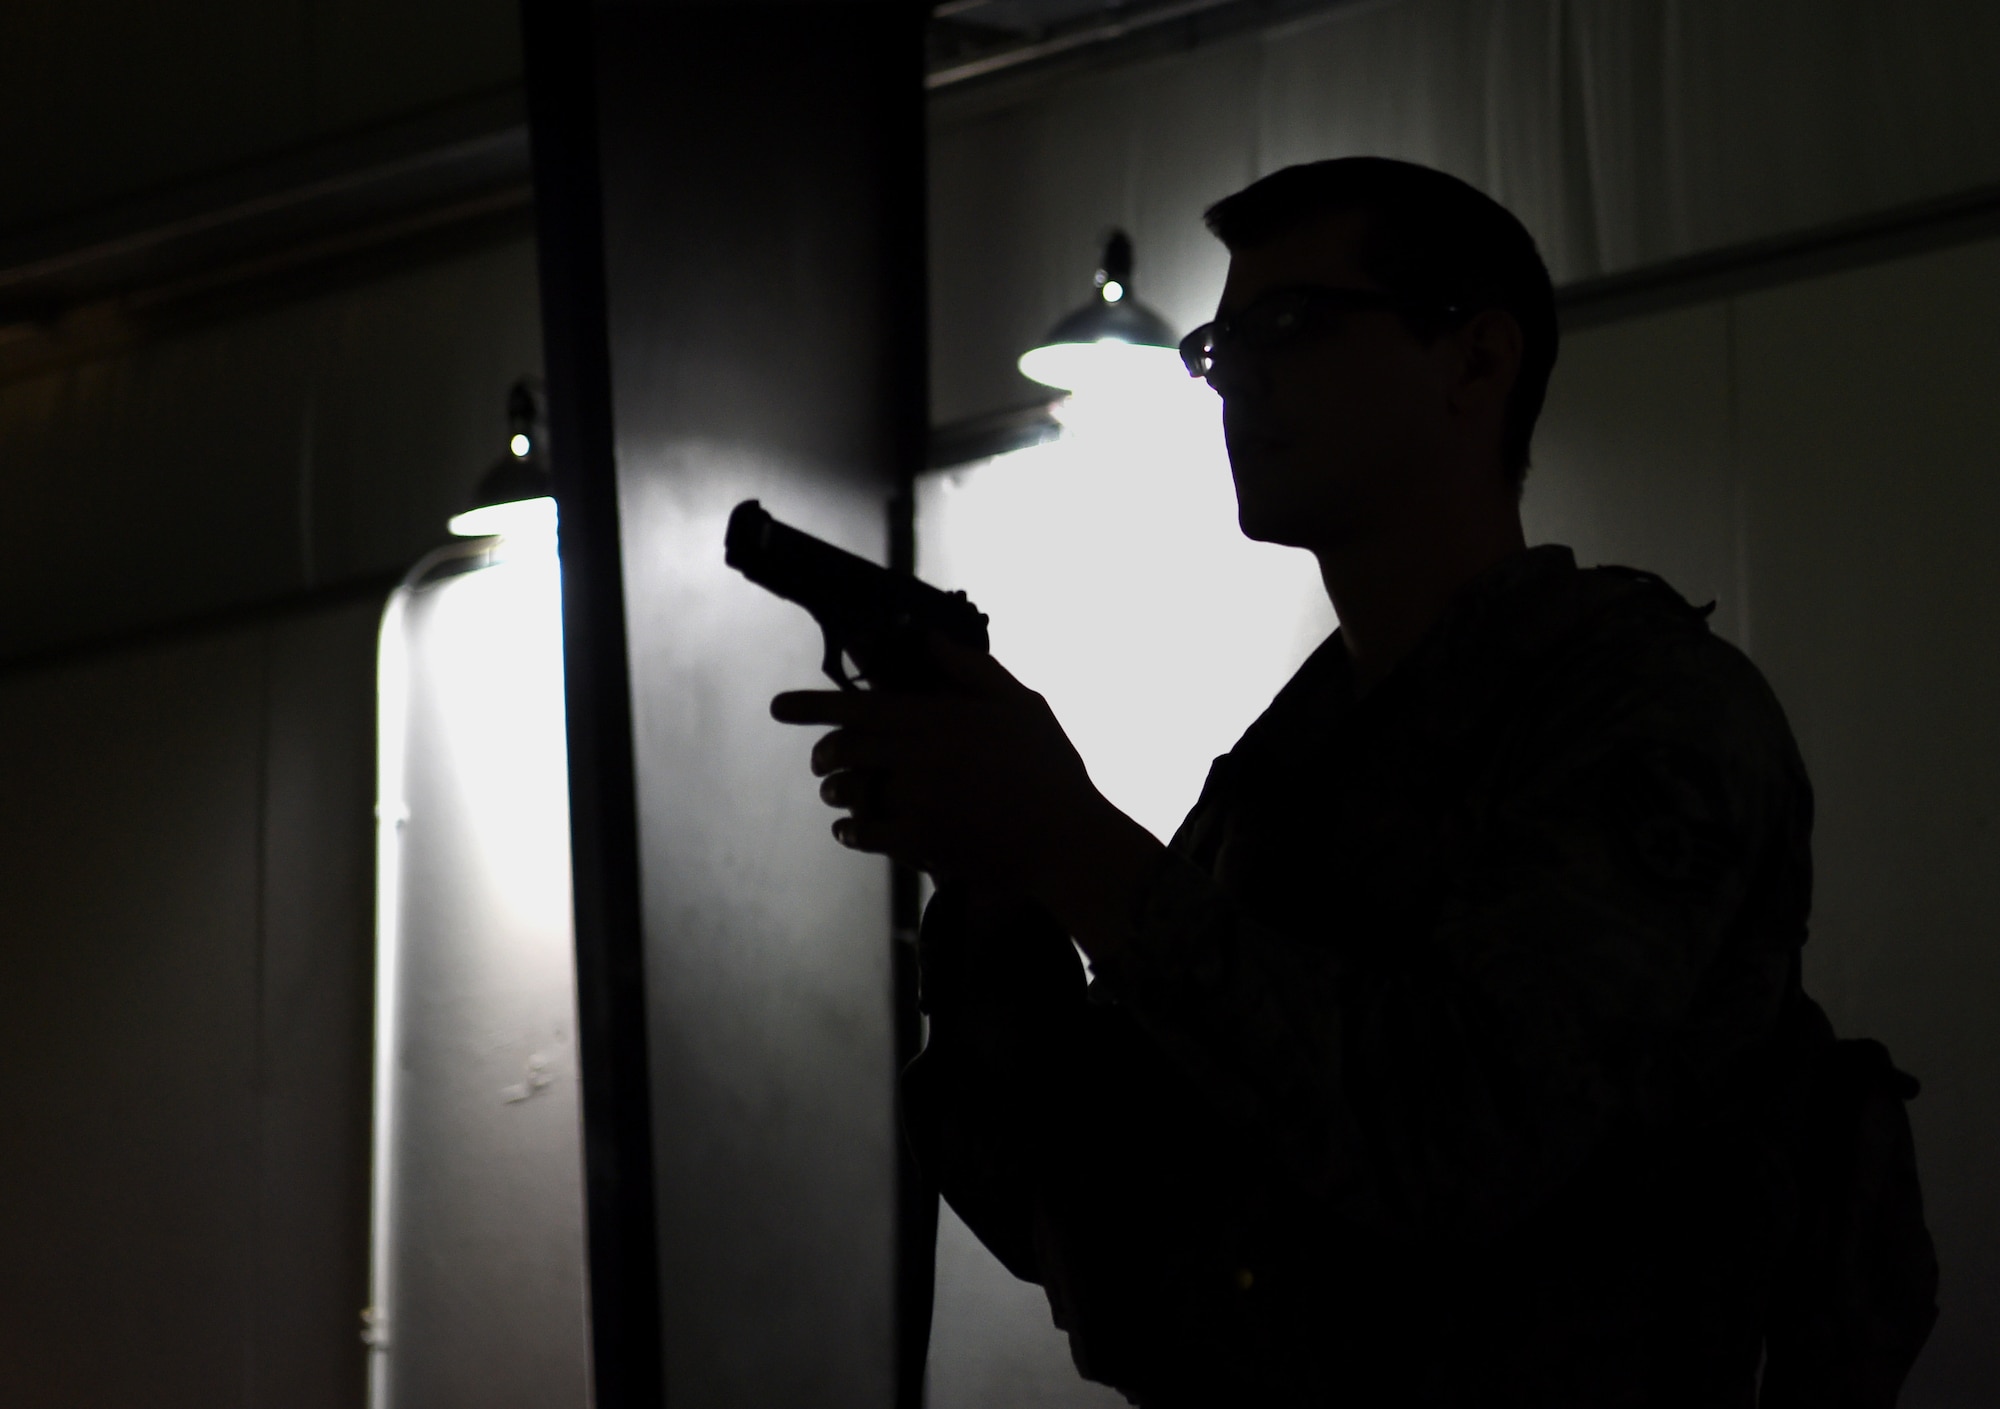 U.S. Air Force Staff Sgt. Chad Rogers, 627th Security Forces Squadron (SFS) noncommissioned officer in charge of plans and programs, removes his weapon during a simulated active-shooter training scenario at Joint Base Lewis-McChord, Wash., April 30, 2019.  Top Air Force leaders declared 2019 as the Year of the Defender, initiating the Reconstitute Defender Initiative to revitalize the security forces squadron across the Air Force. As a part of this, the 627th SFS has worked to increase their time using the U.S. Army’s urban-response simulator for training. (U.S. Air Force photo by Senior Airman Tryphena Mayhugh)